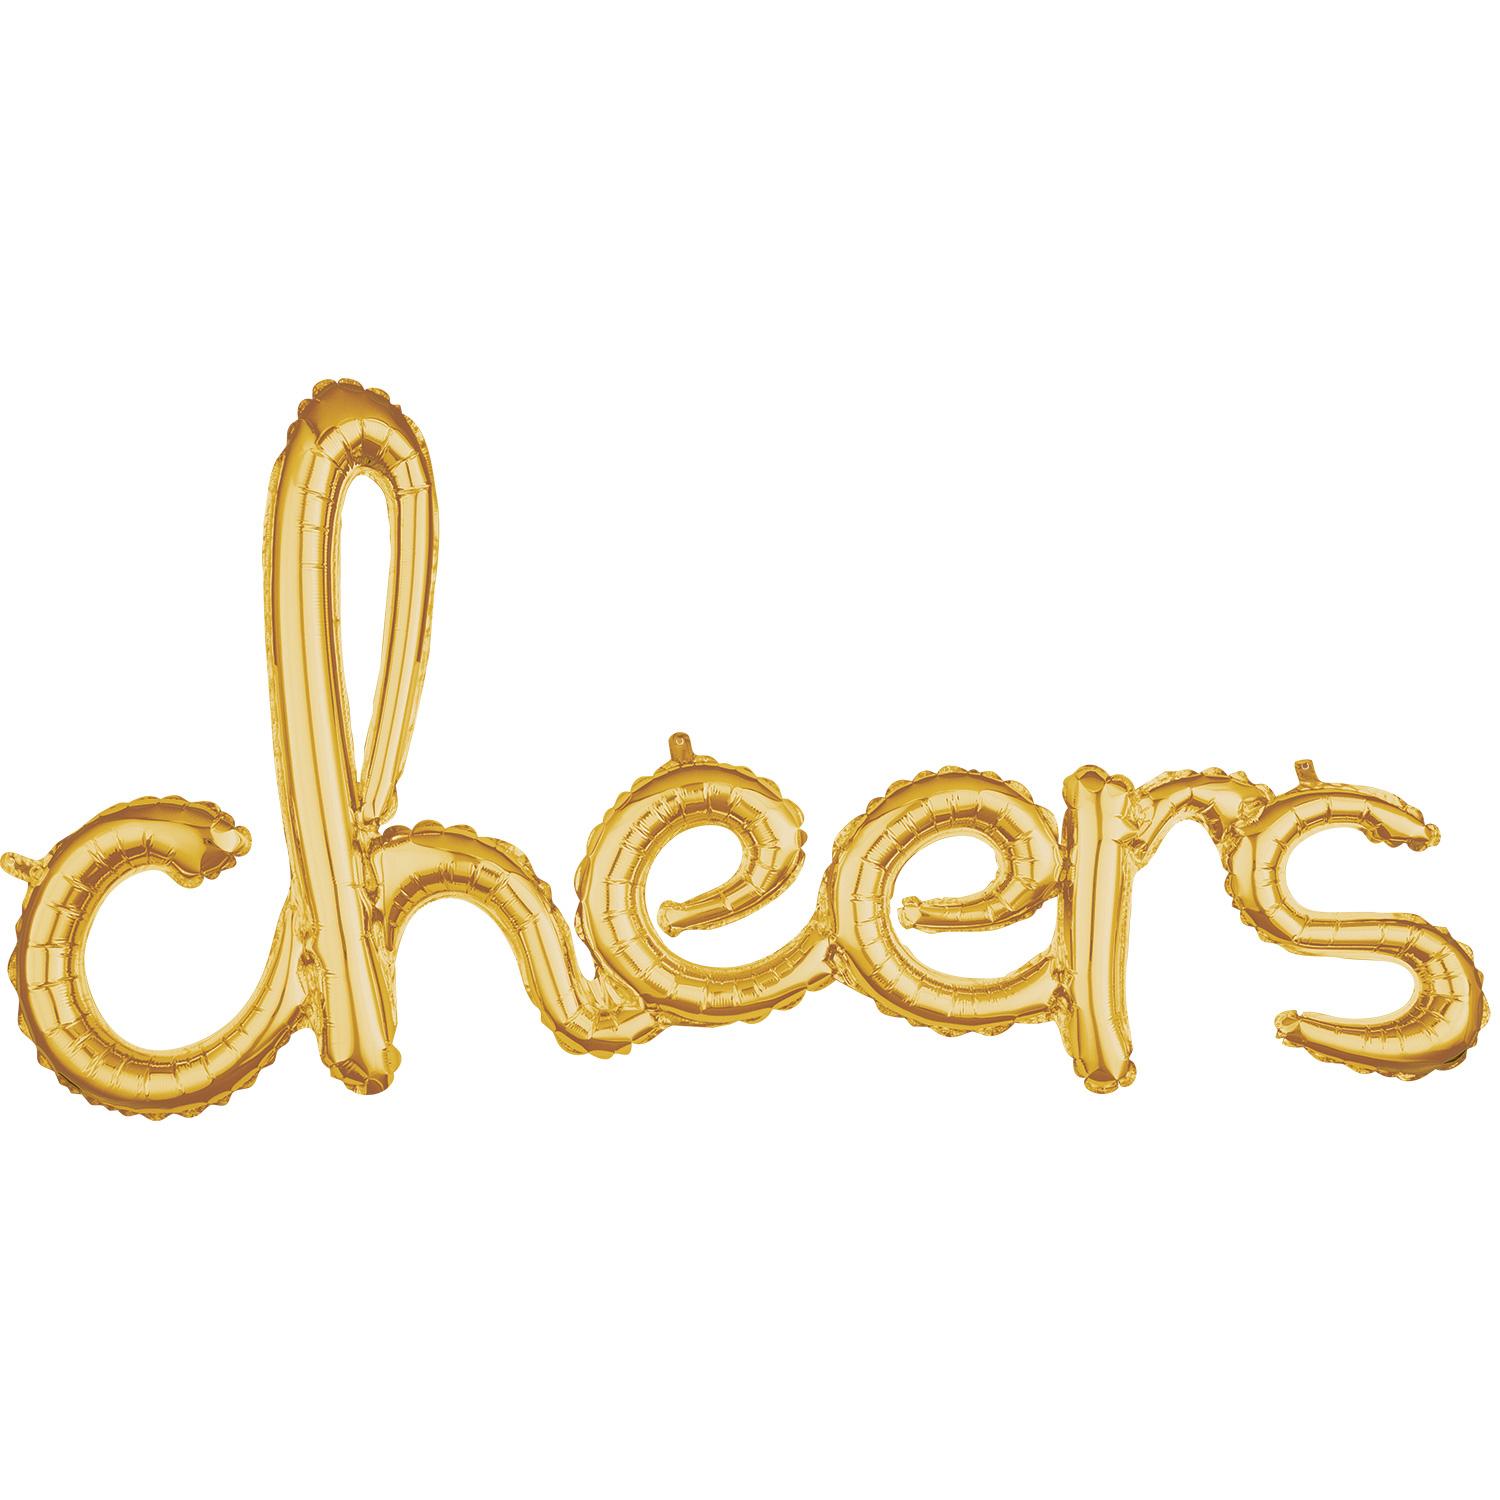 Cheers Script Phrase Gold Foil Balloon 101x53cm Balloons & Streamers - Party Centre